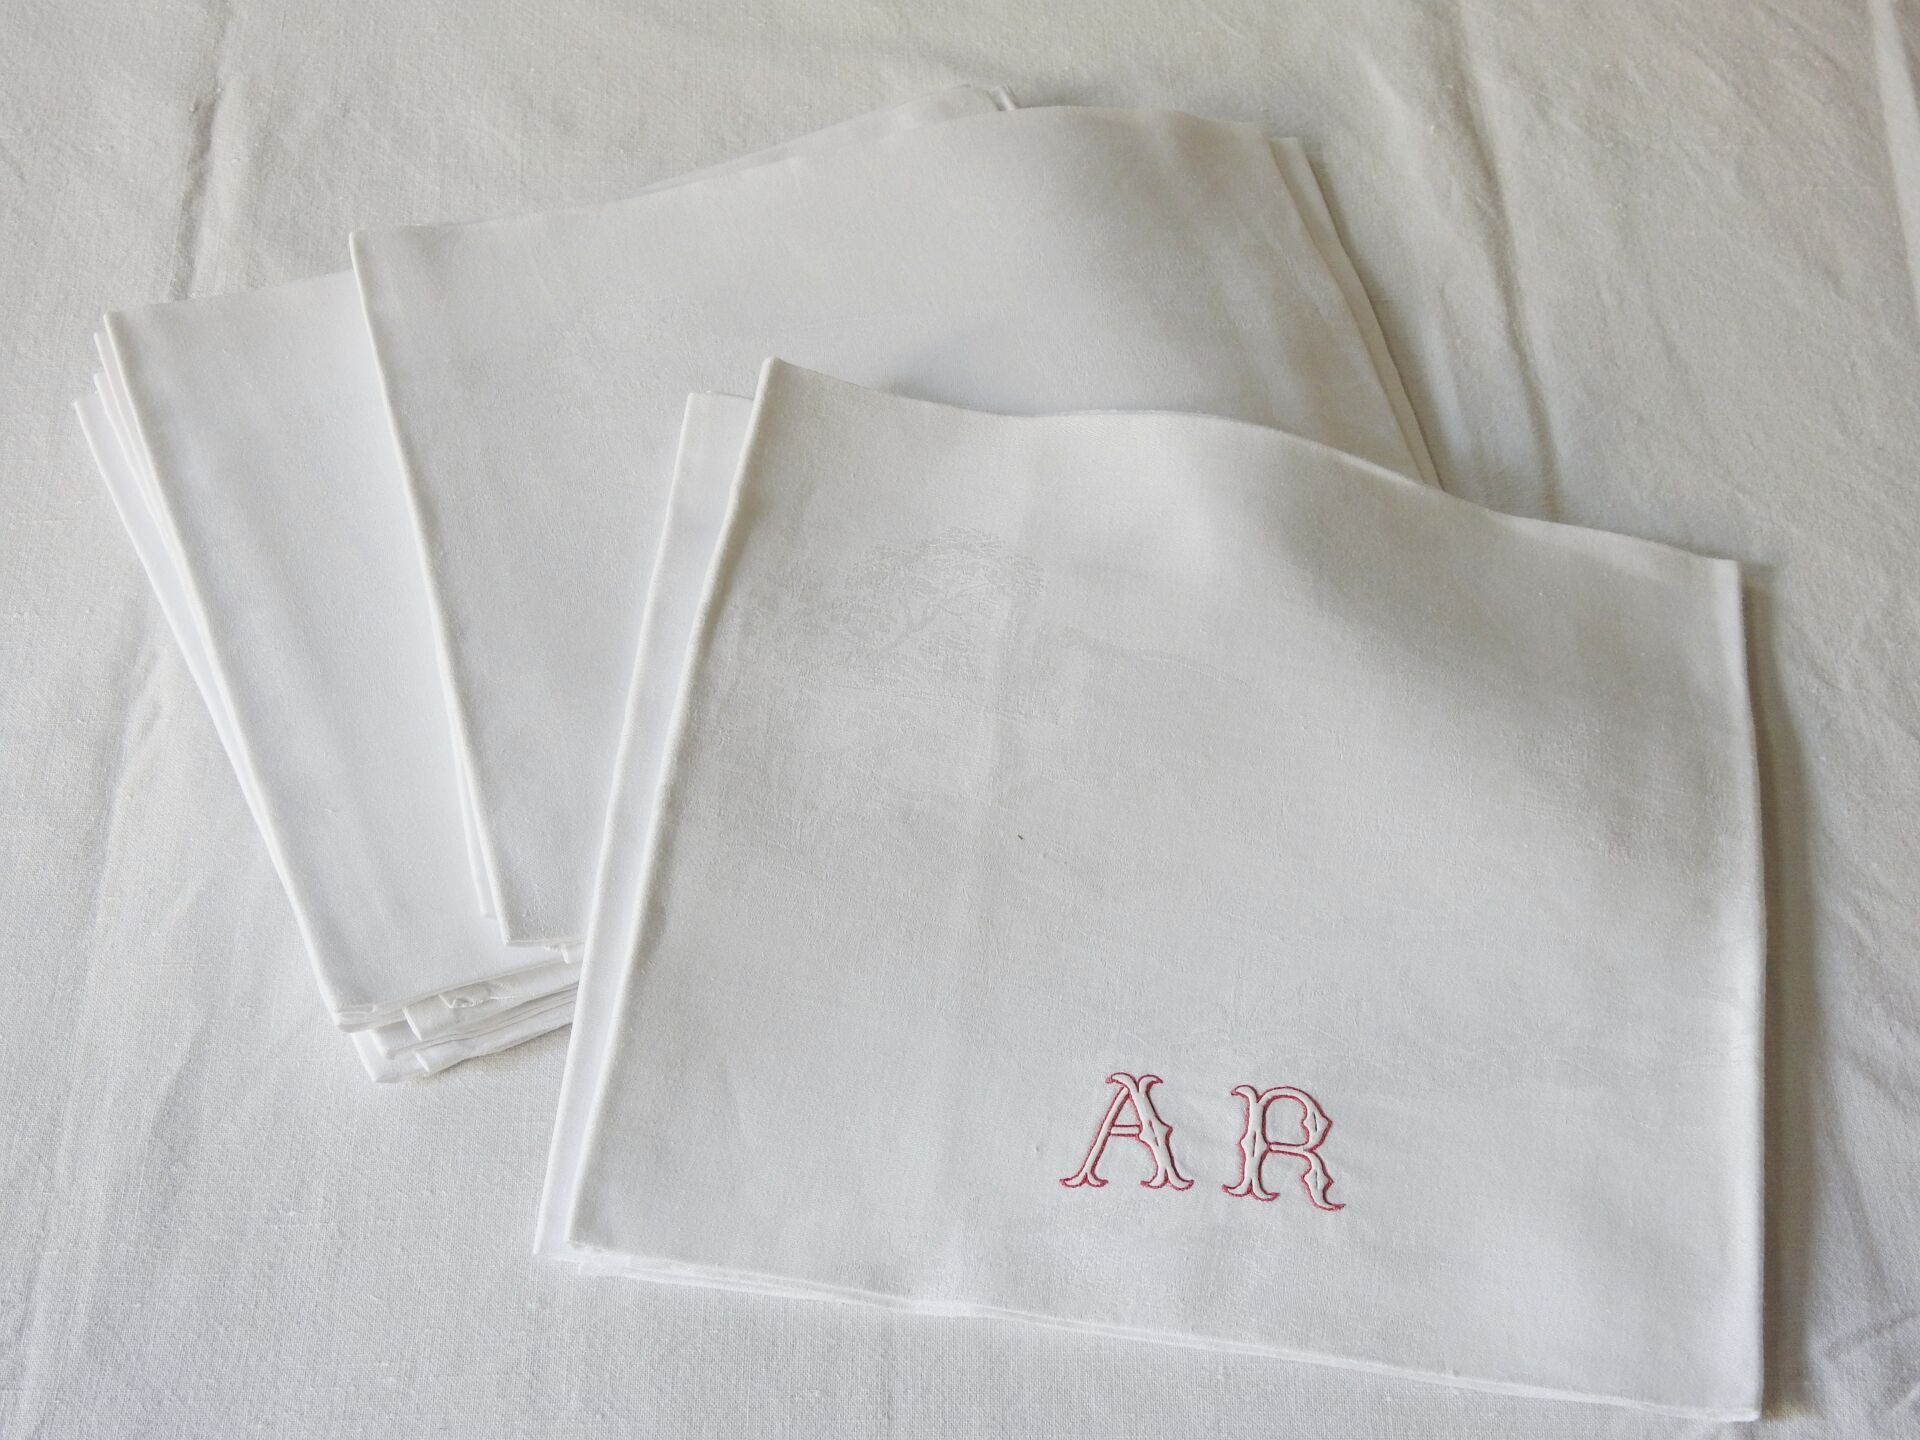 Null Twelve Large Napkins with hunting decor and A.R. In red and white.